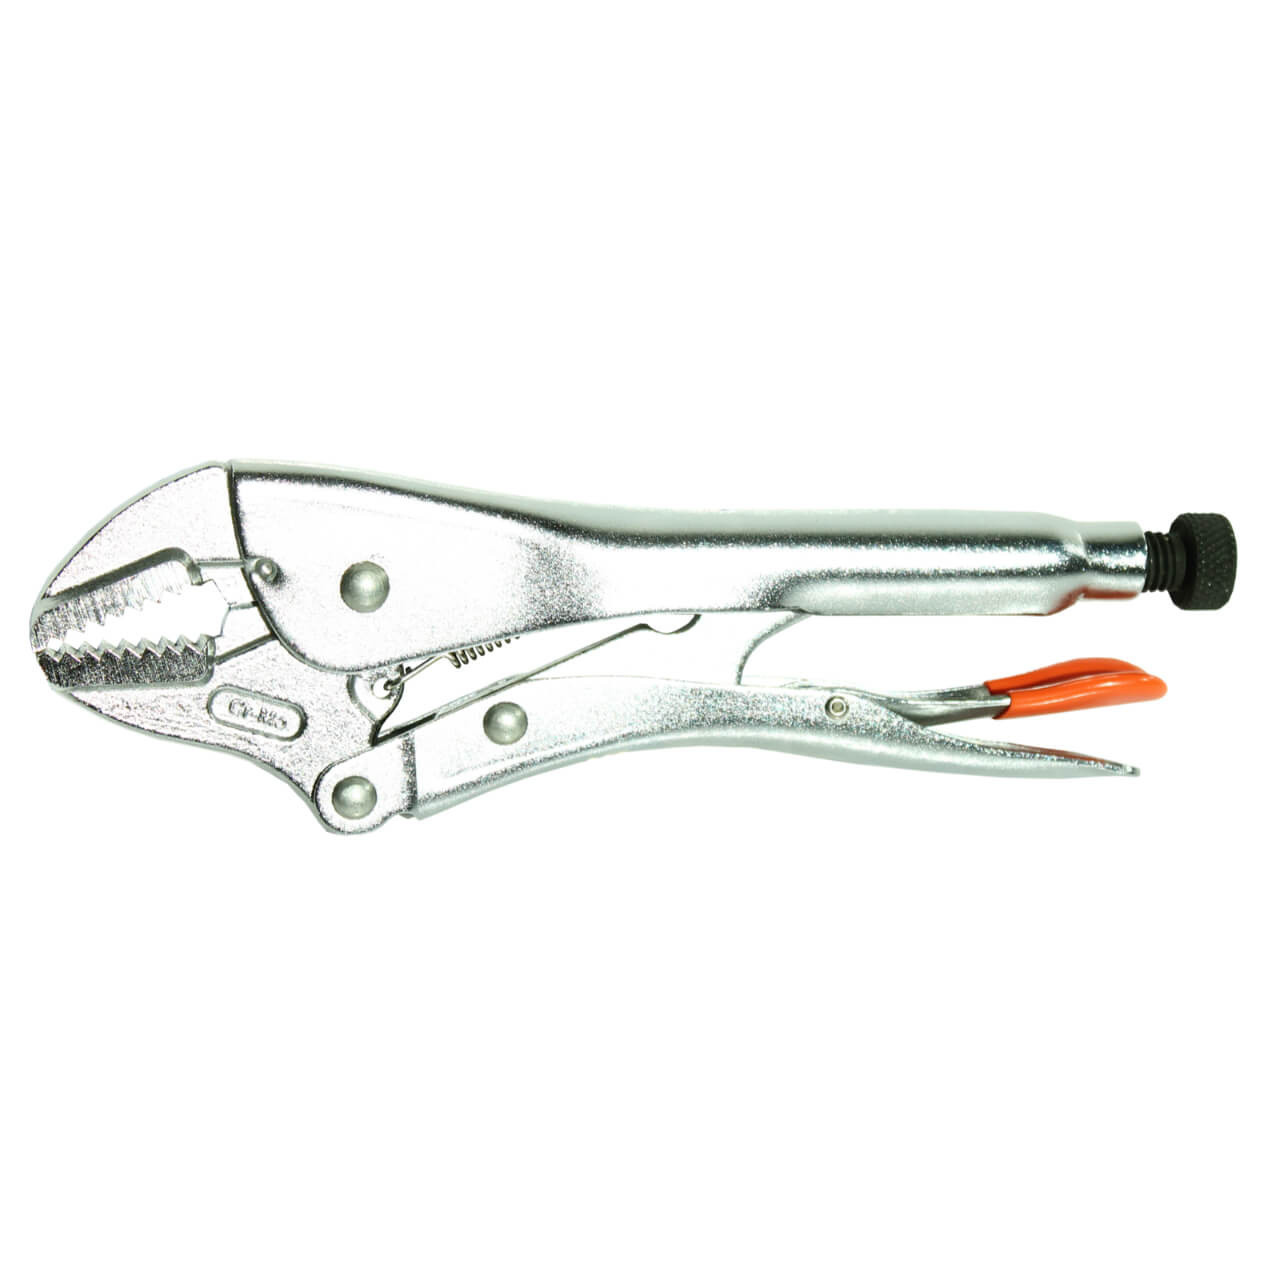 SP Tools 250mm Curved Jaw Locking Pliers